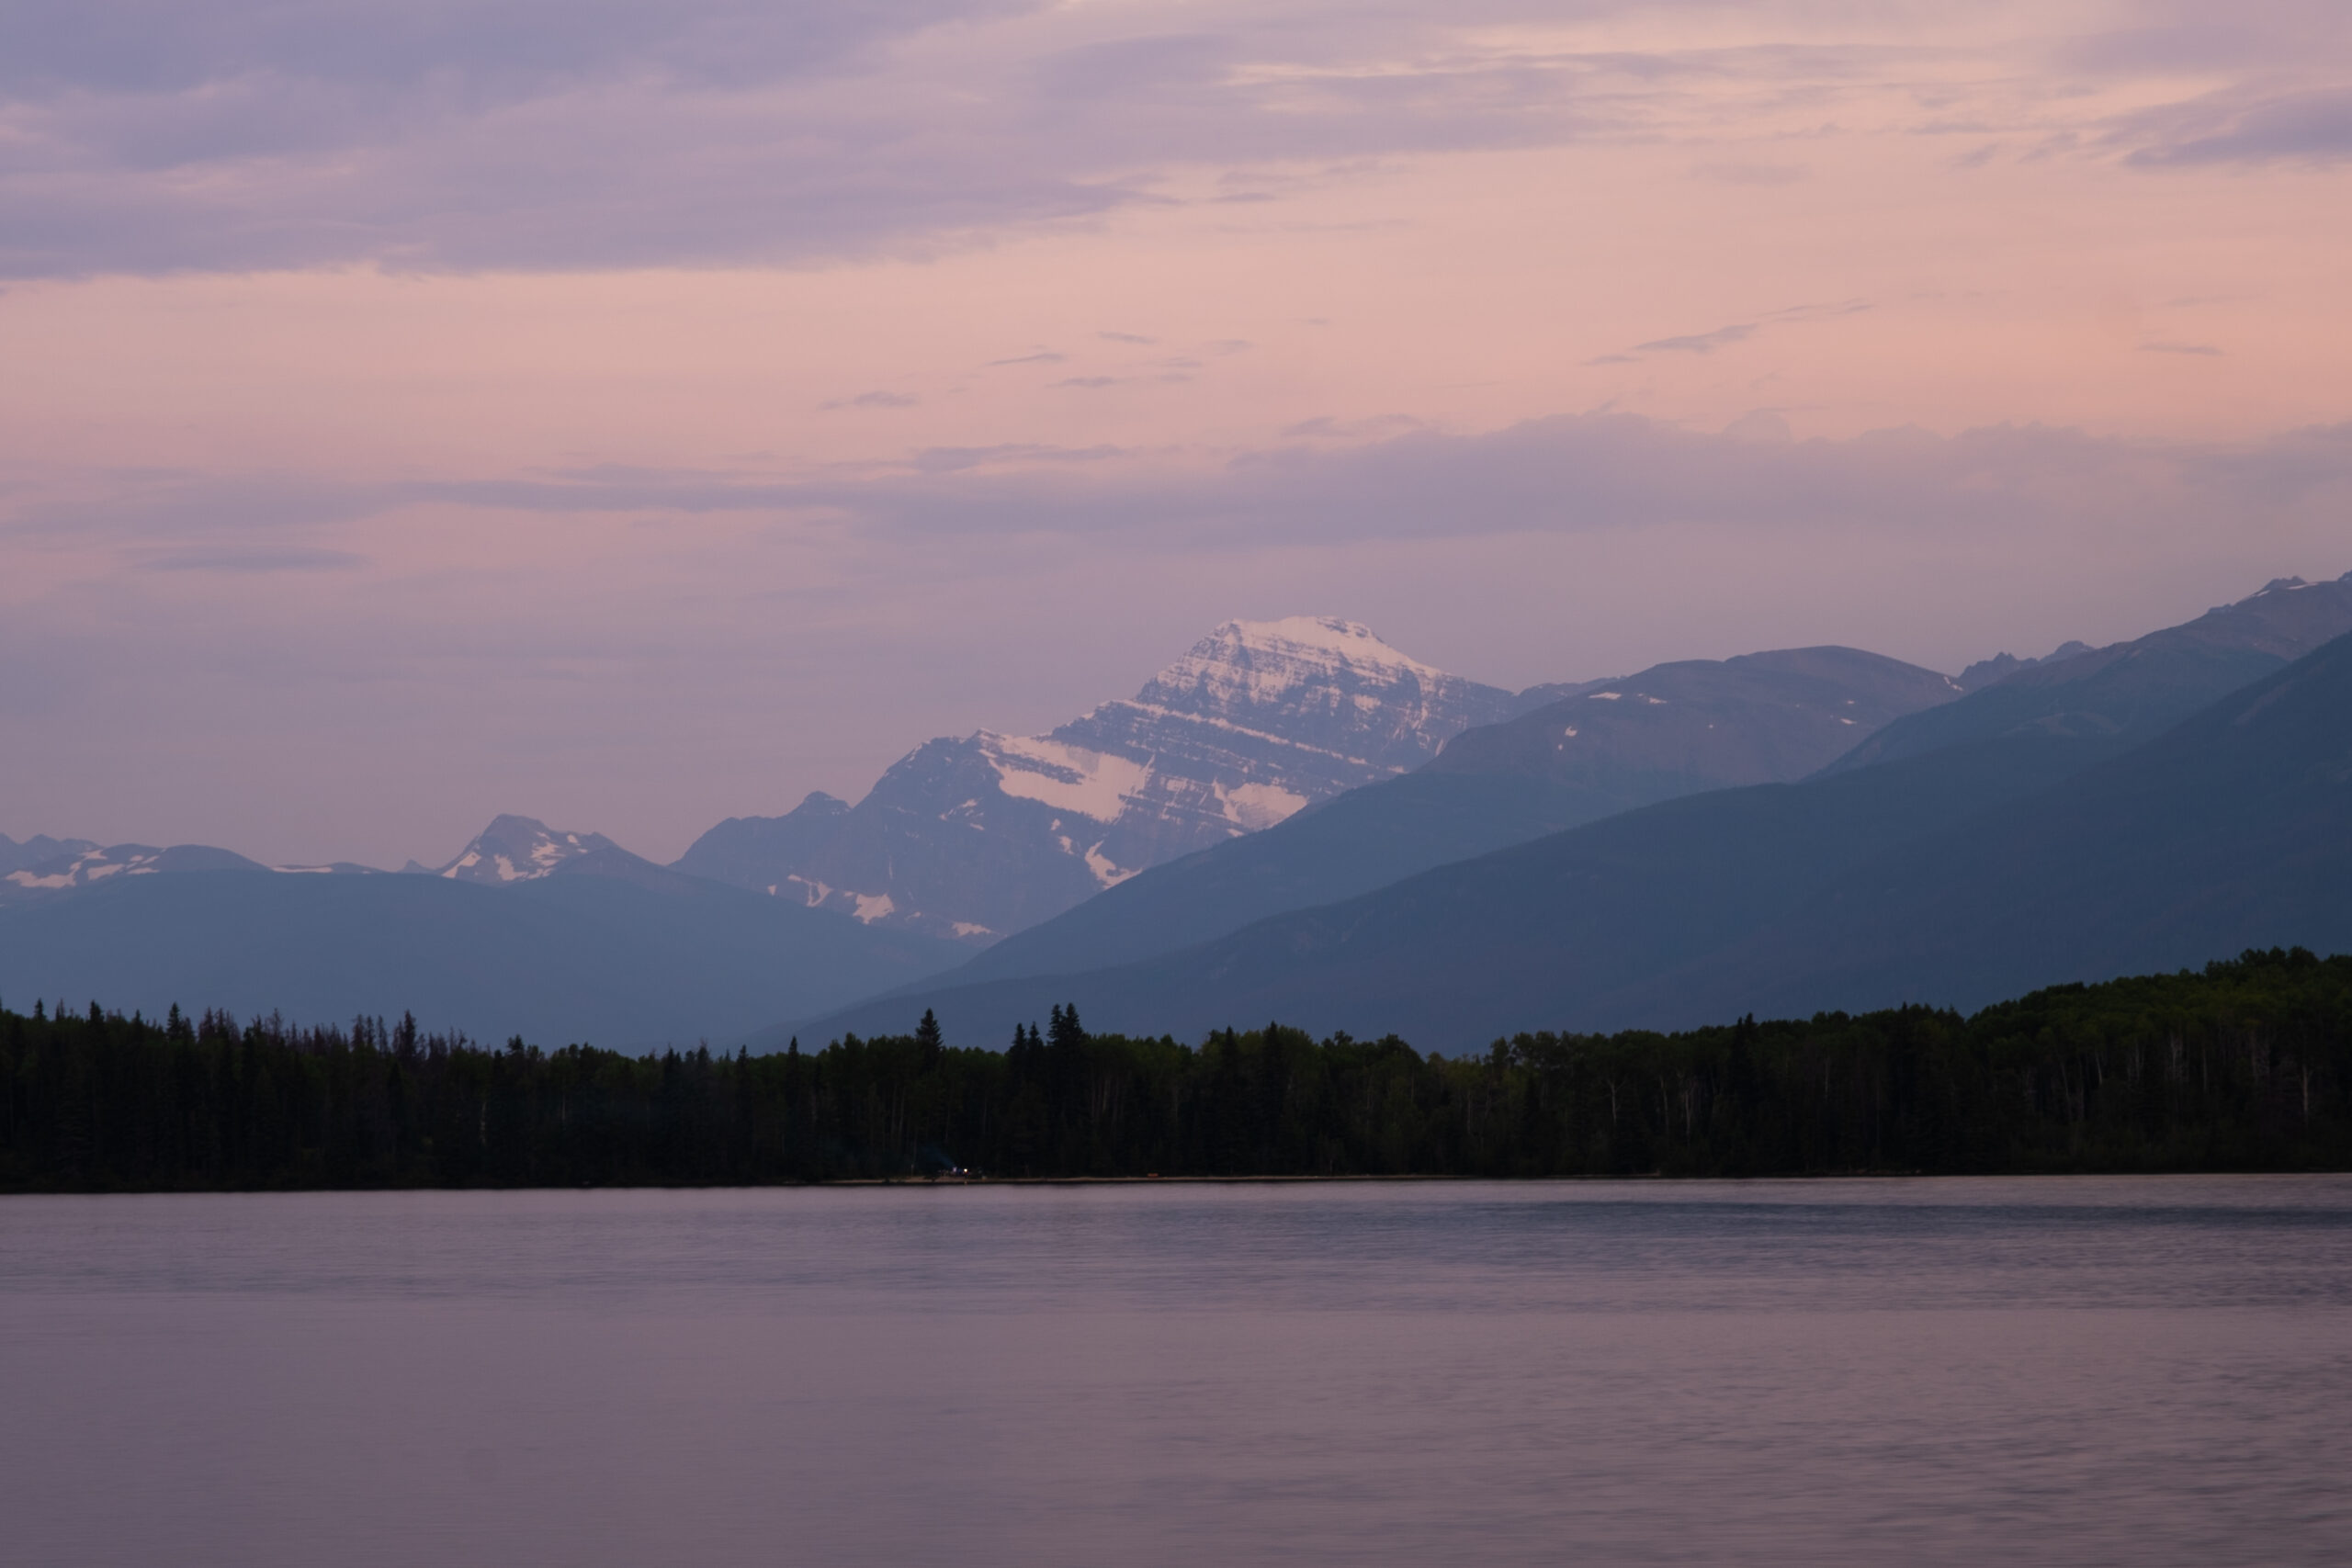 Mount Edith Cavell from Pyramid Island